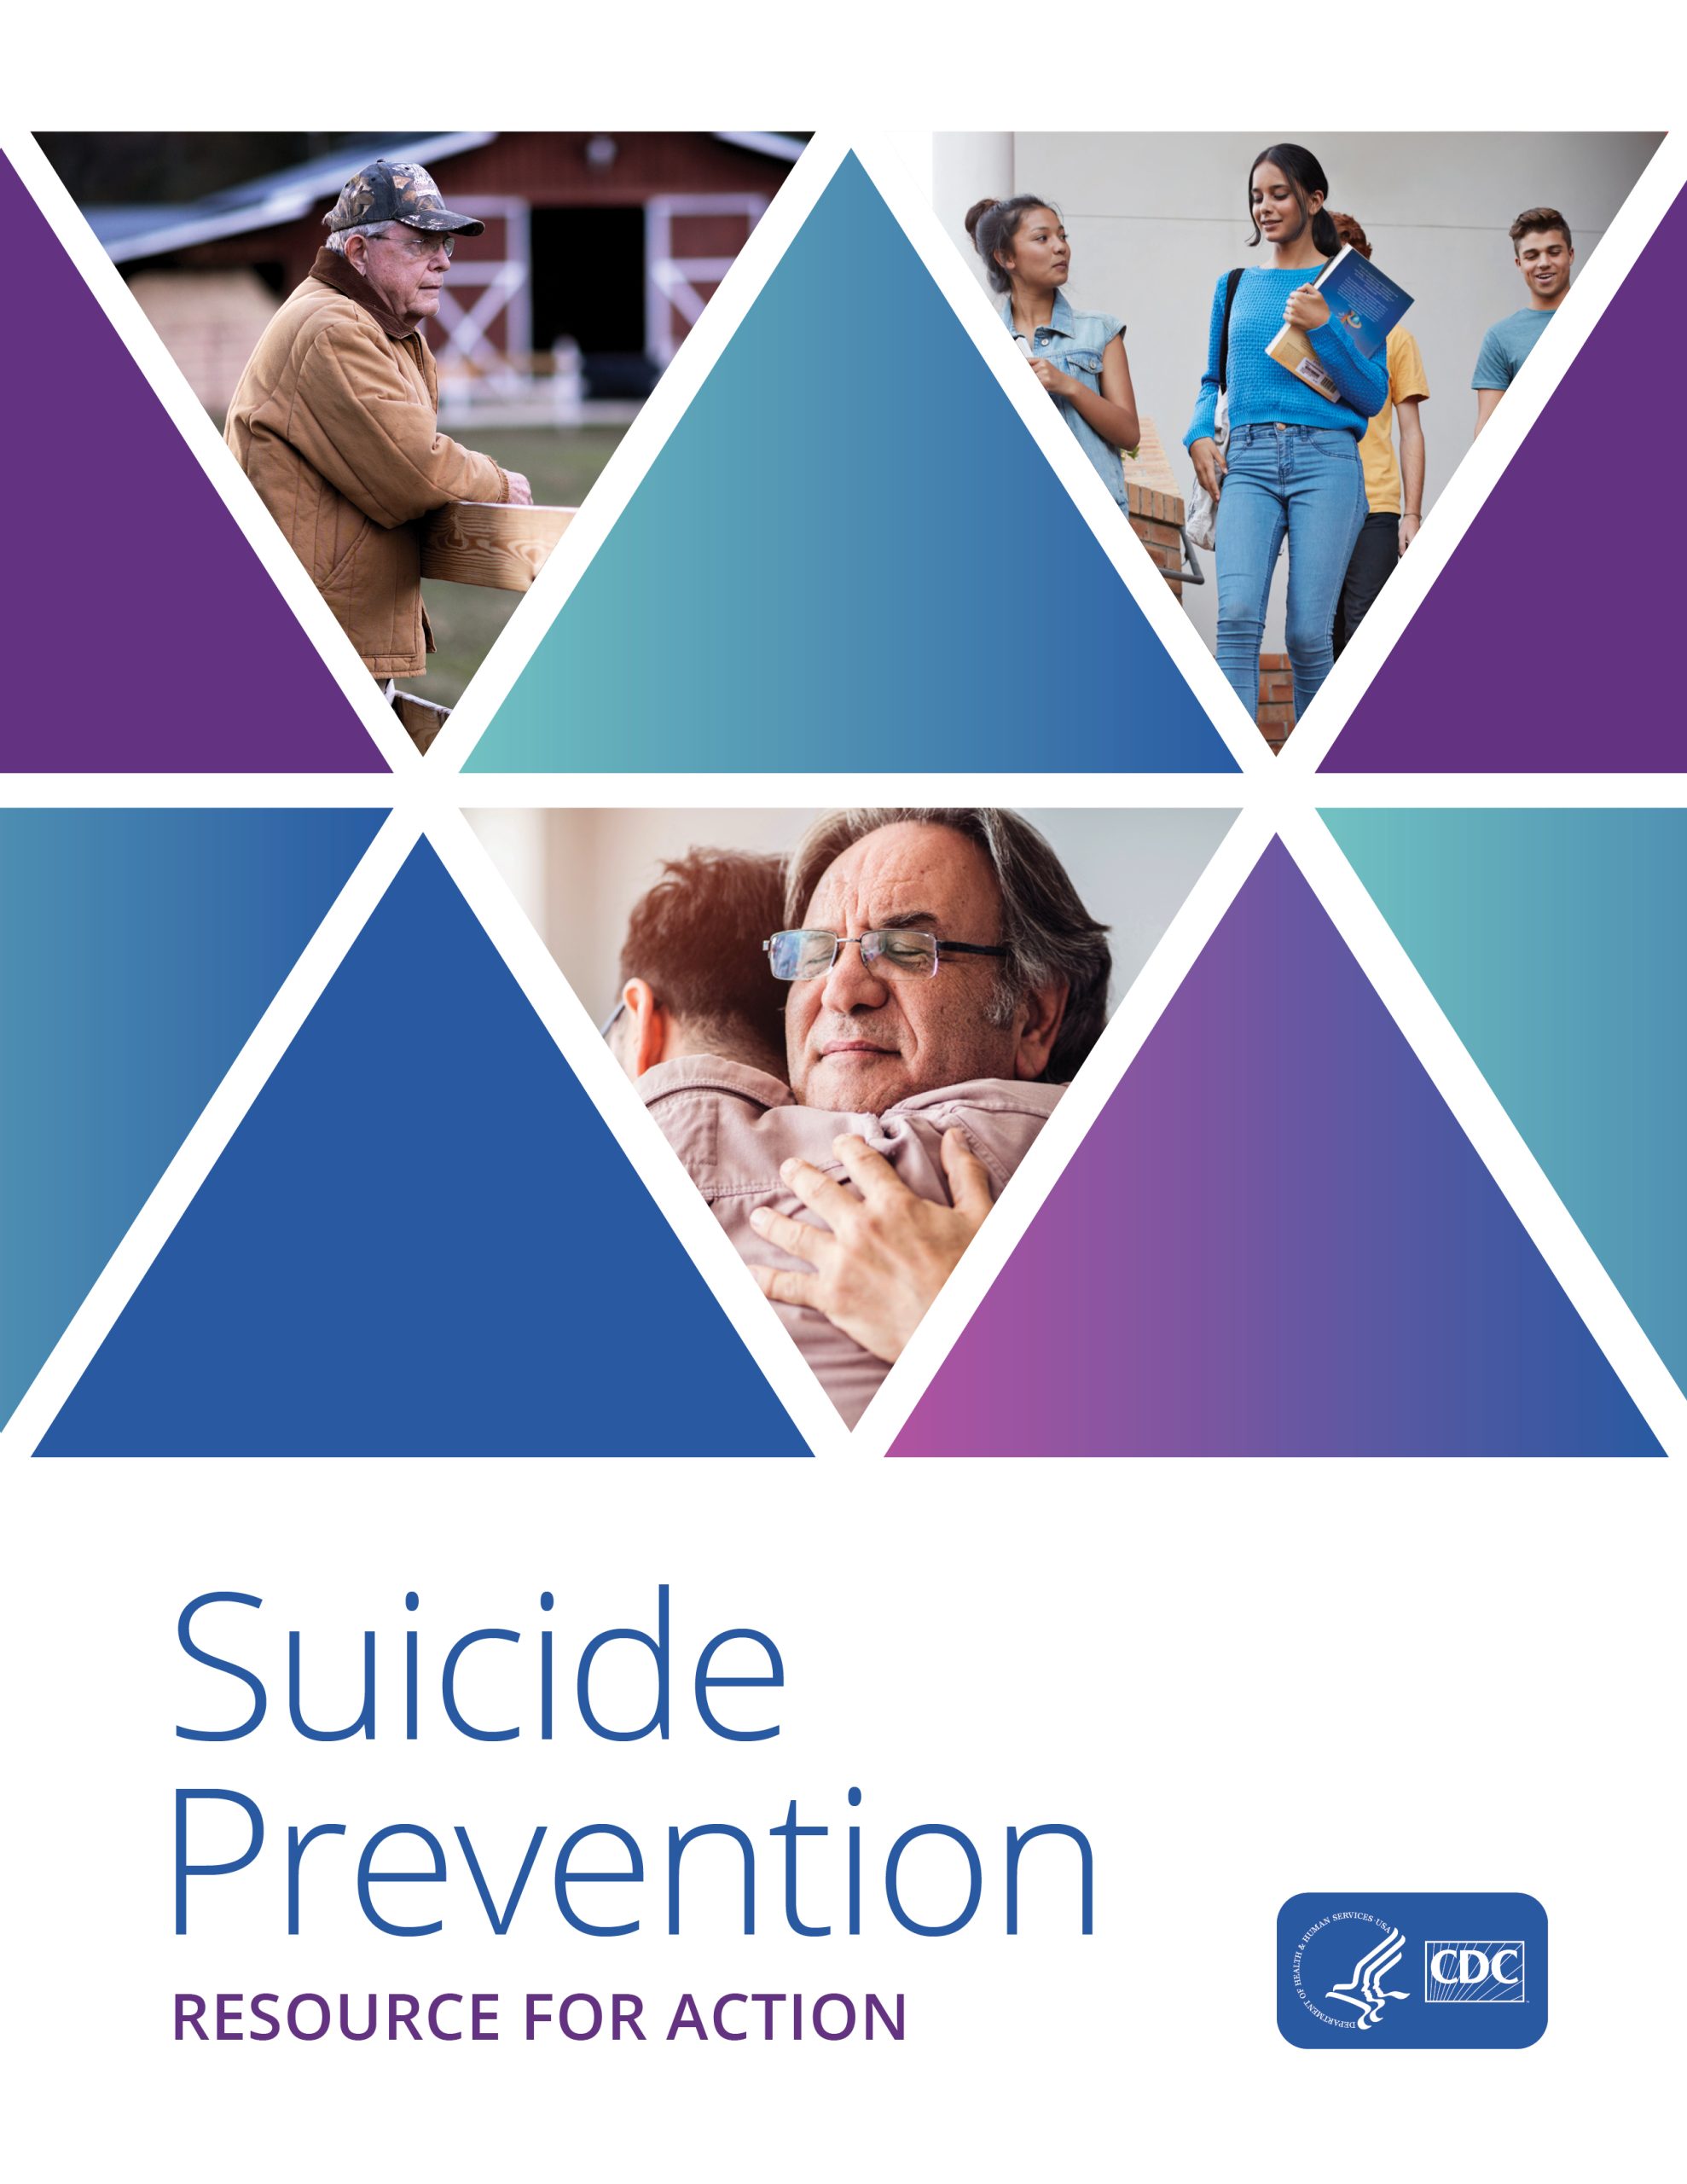 Cover image of Suicide Prevention PDF.